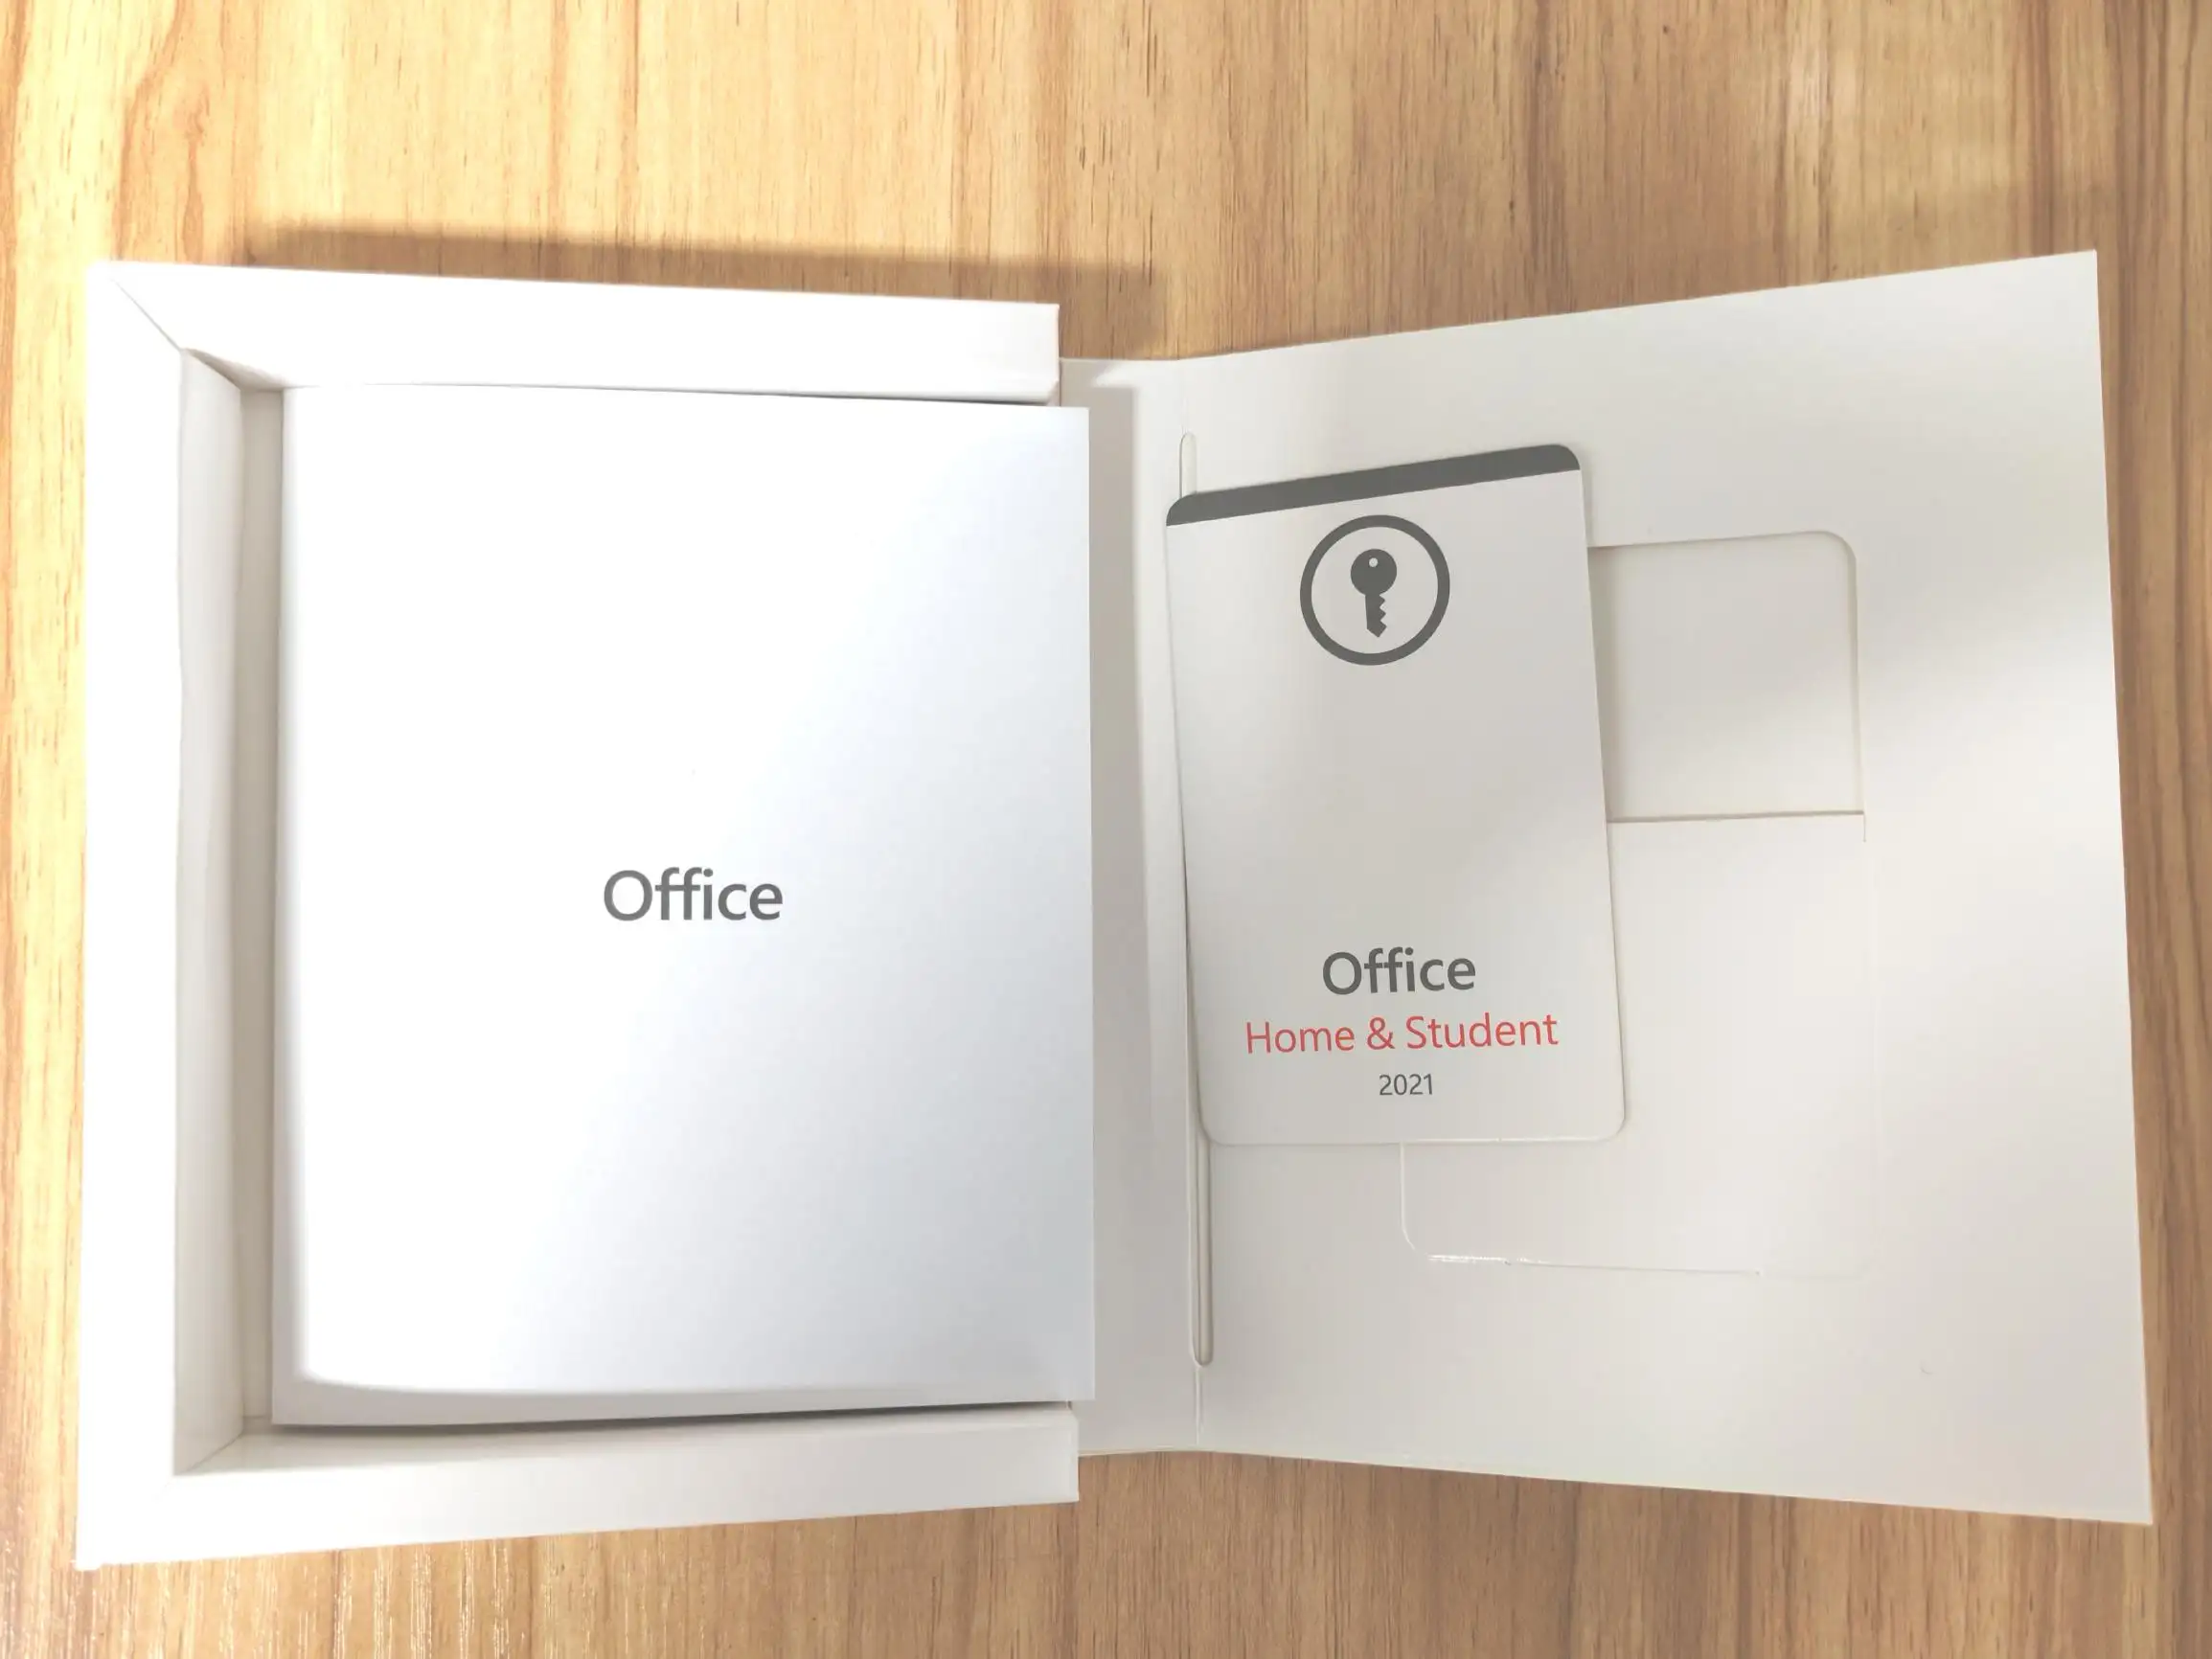 Genuine Office Home Student 1PC Mac Professional Retail OEM Key, activación 100%